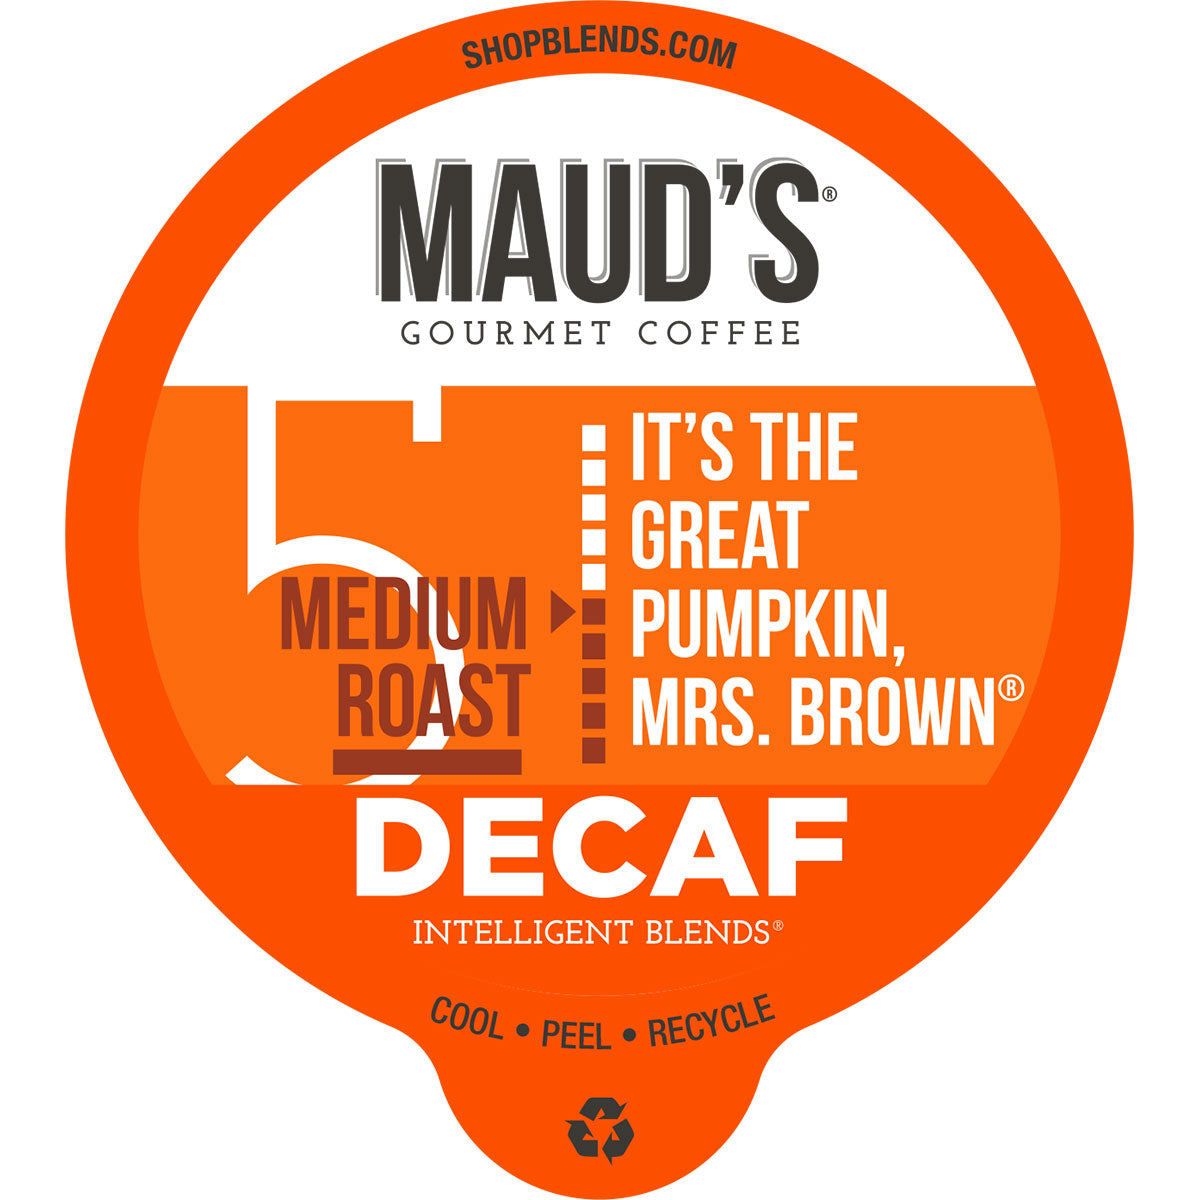 Maud's Decaf Pumpkin Spice Flavored Coffee Pods  (It's The Great Pumpkin, Mrs. Brown)